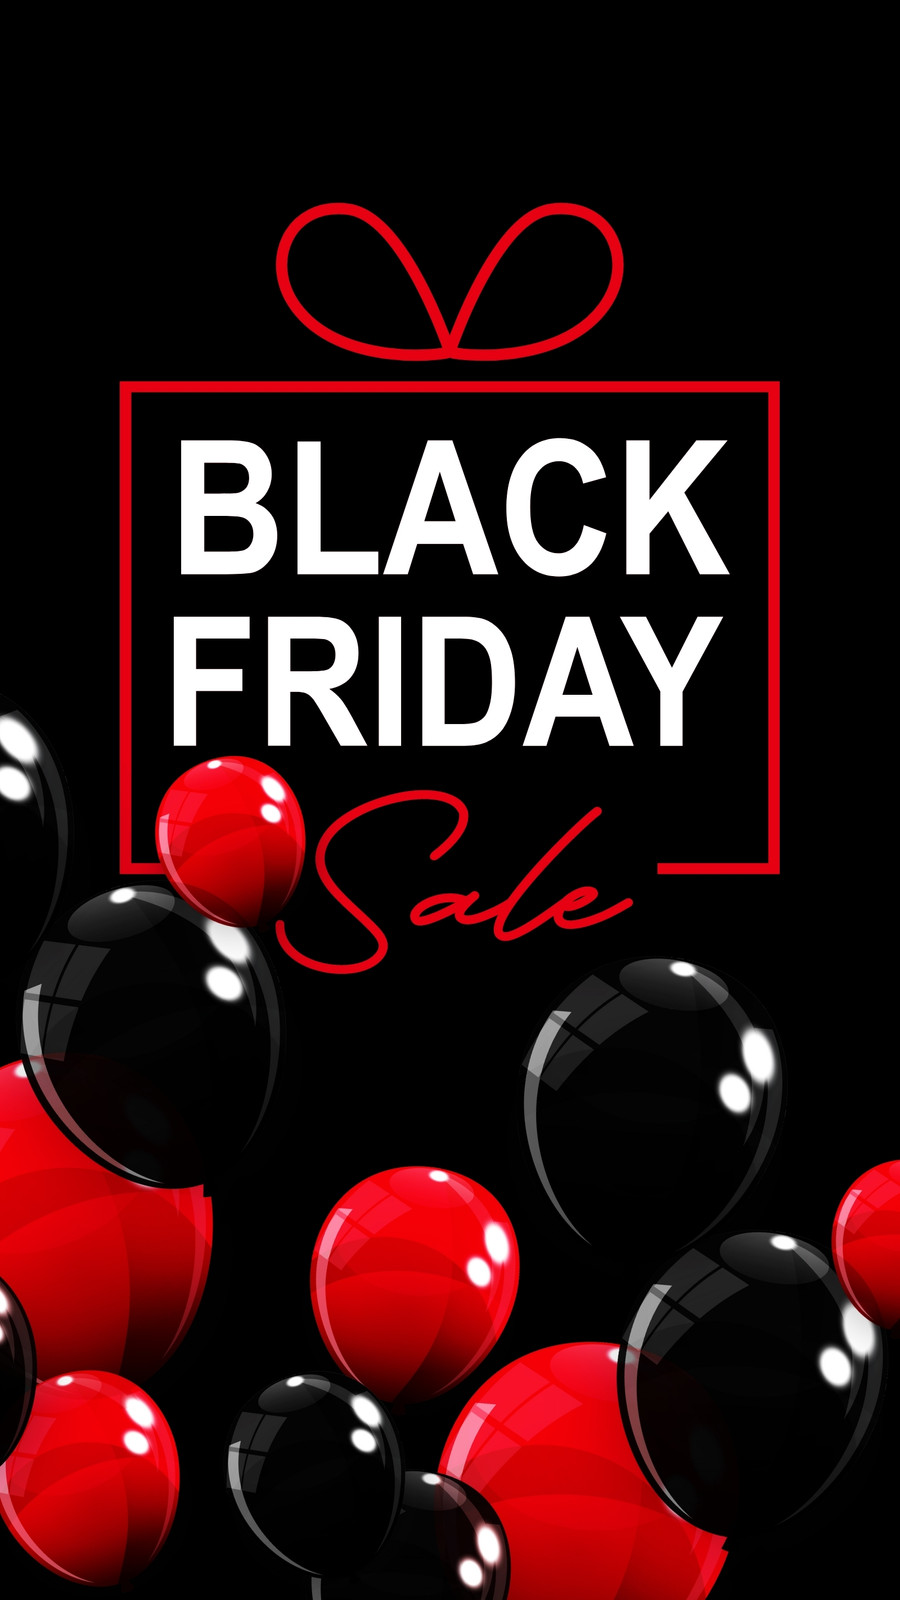 Page 20 - Free and customizable black friday templates